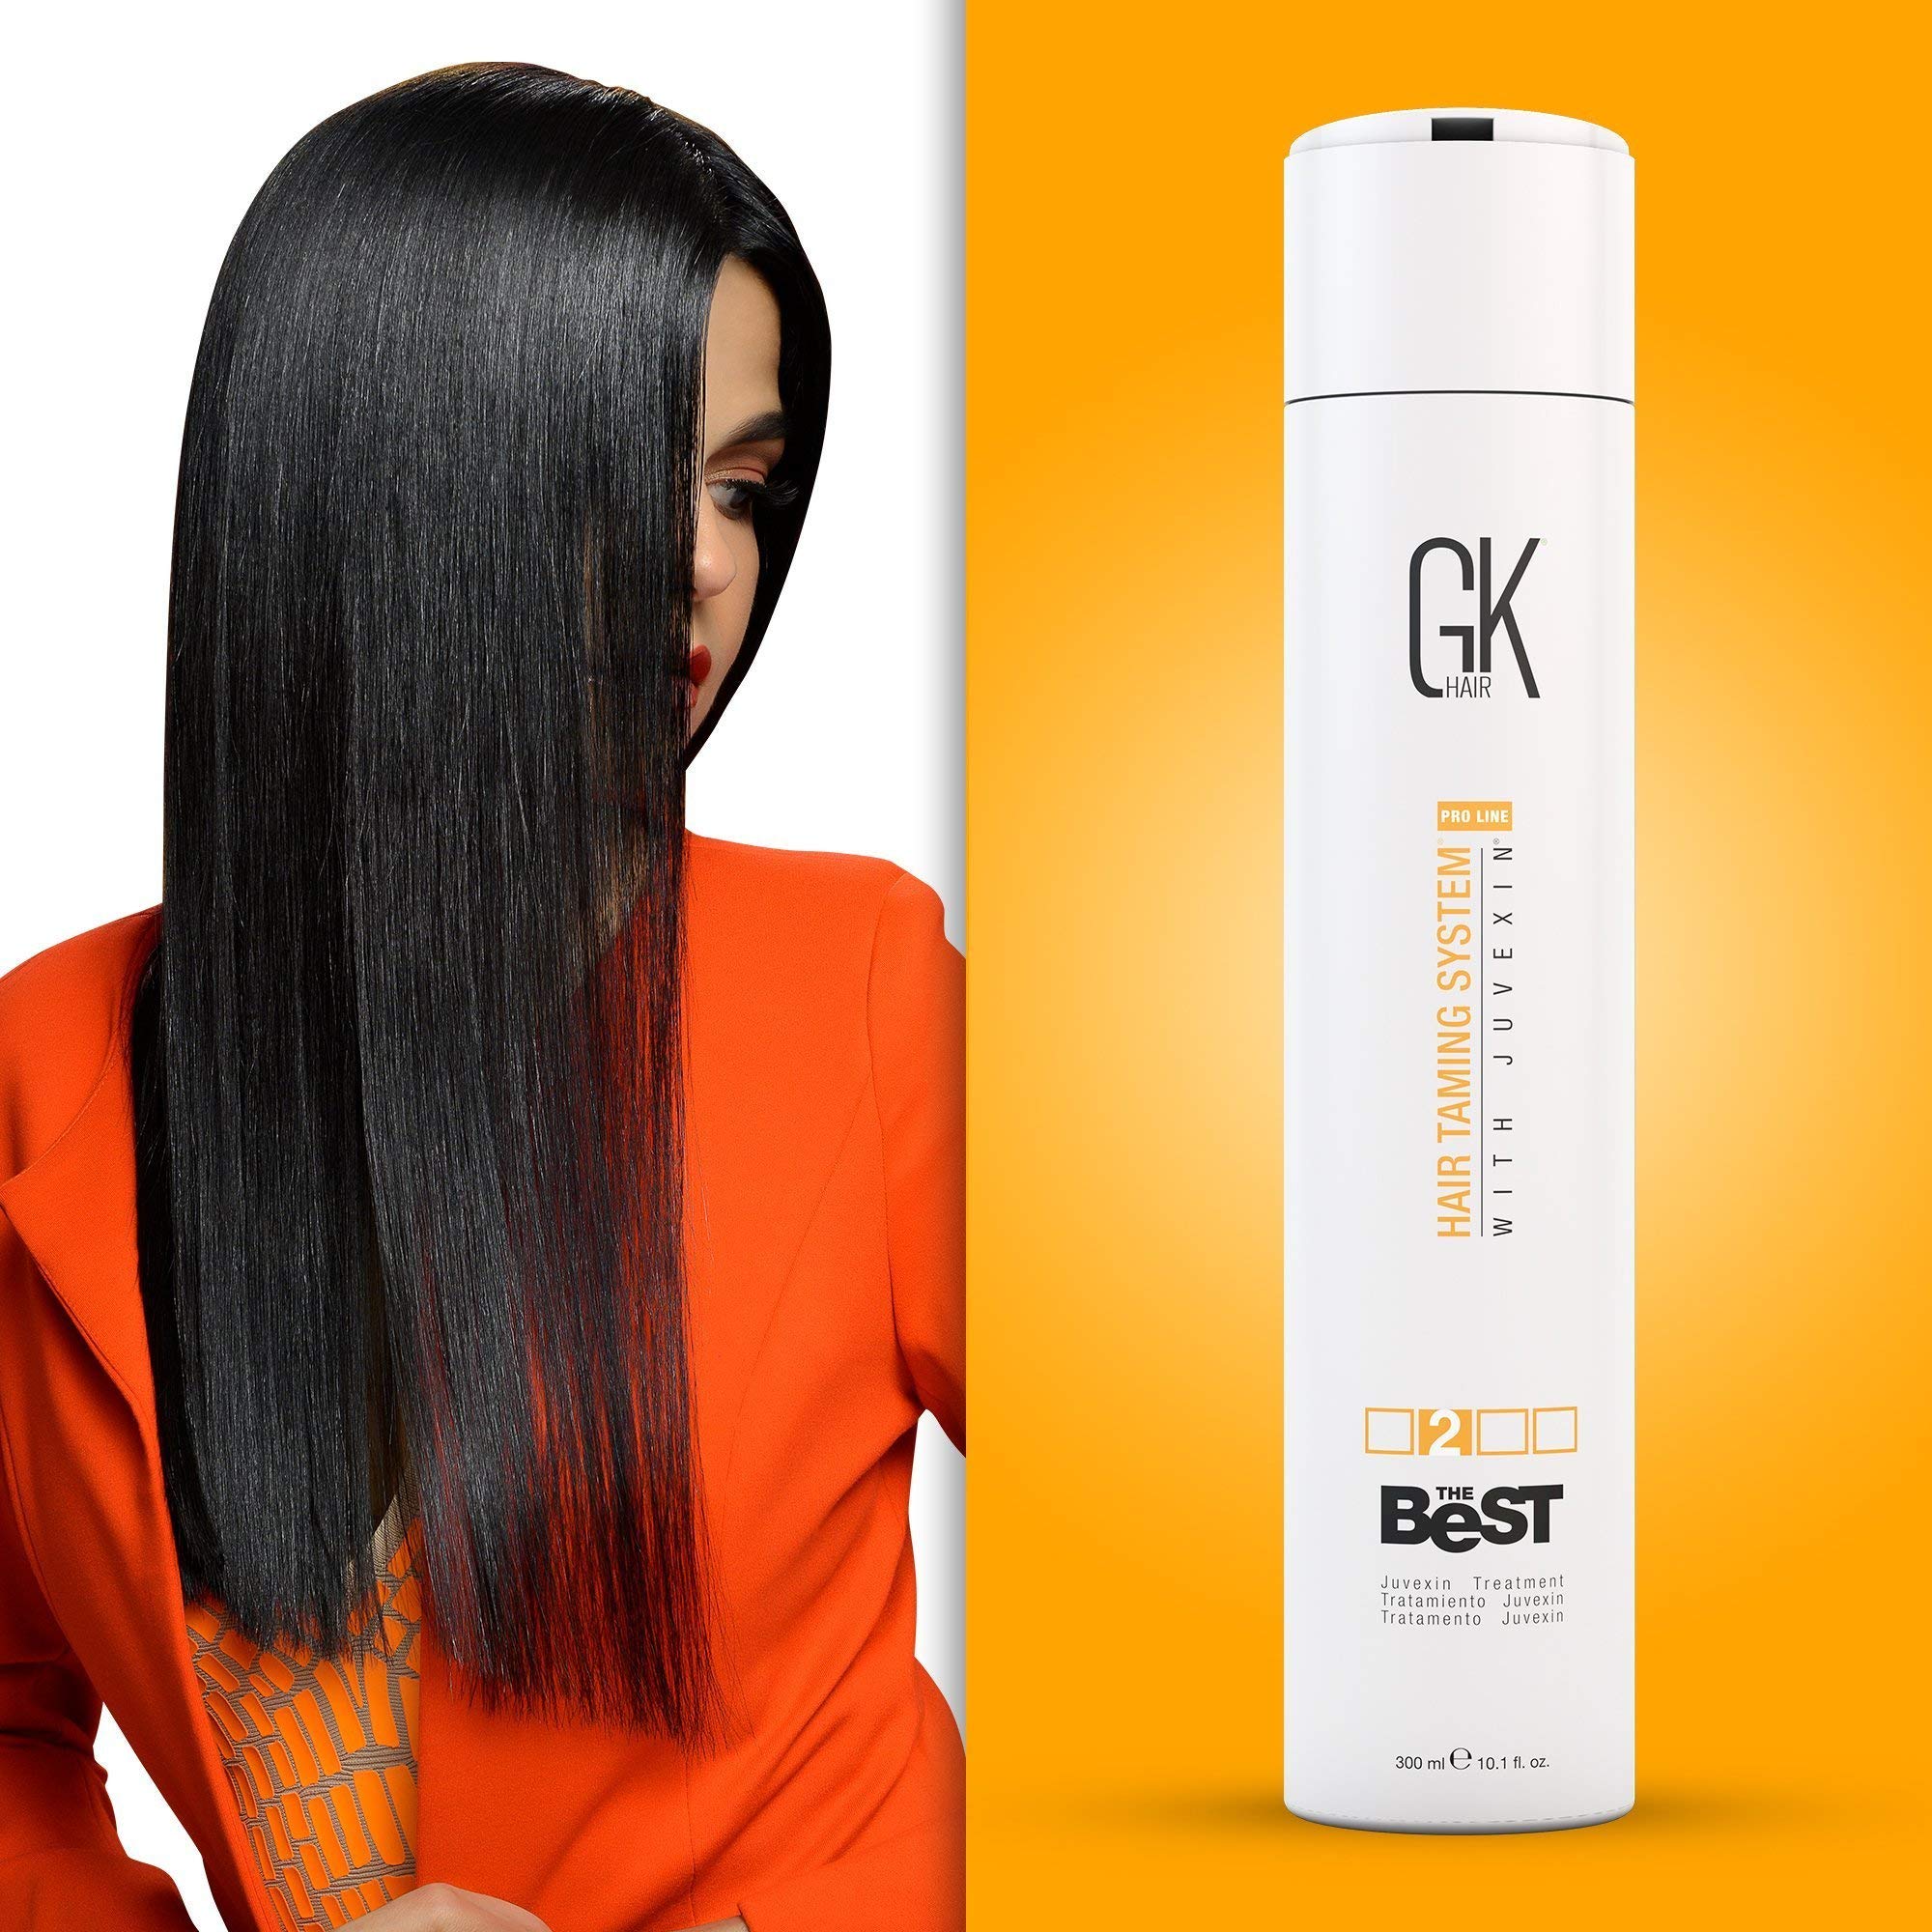 Gk Hair Colorprotection Moisturizing Shampoo And Conditioner Duo 300 ml  Each With 100 ml Moisturizing Shampoo